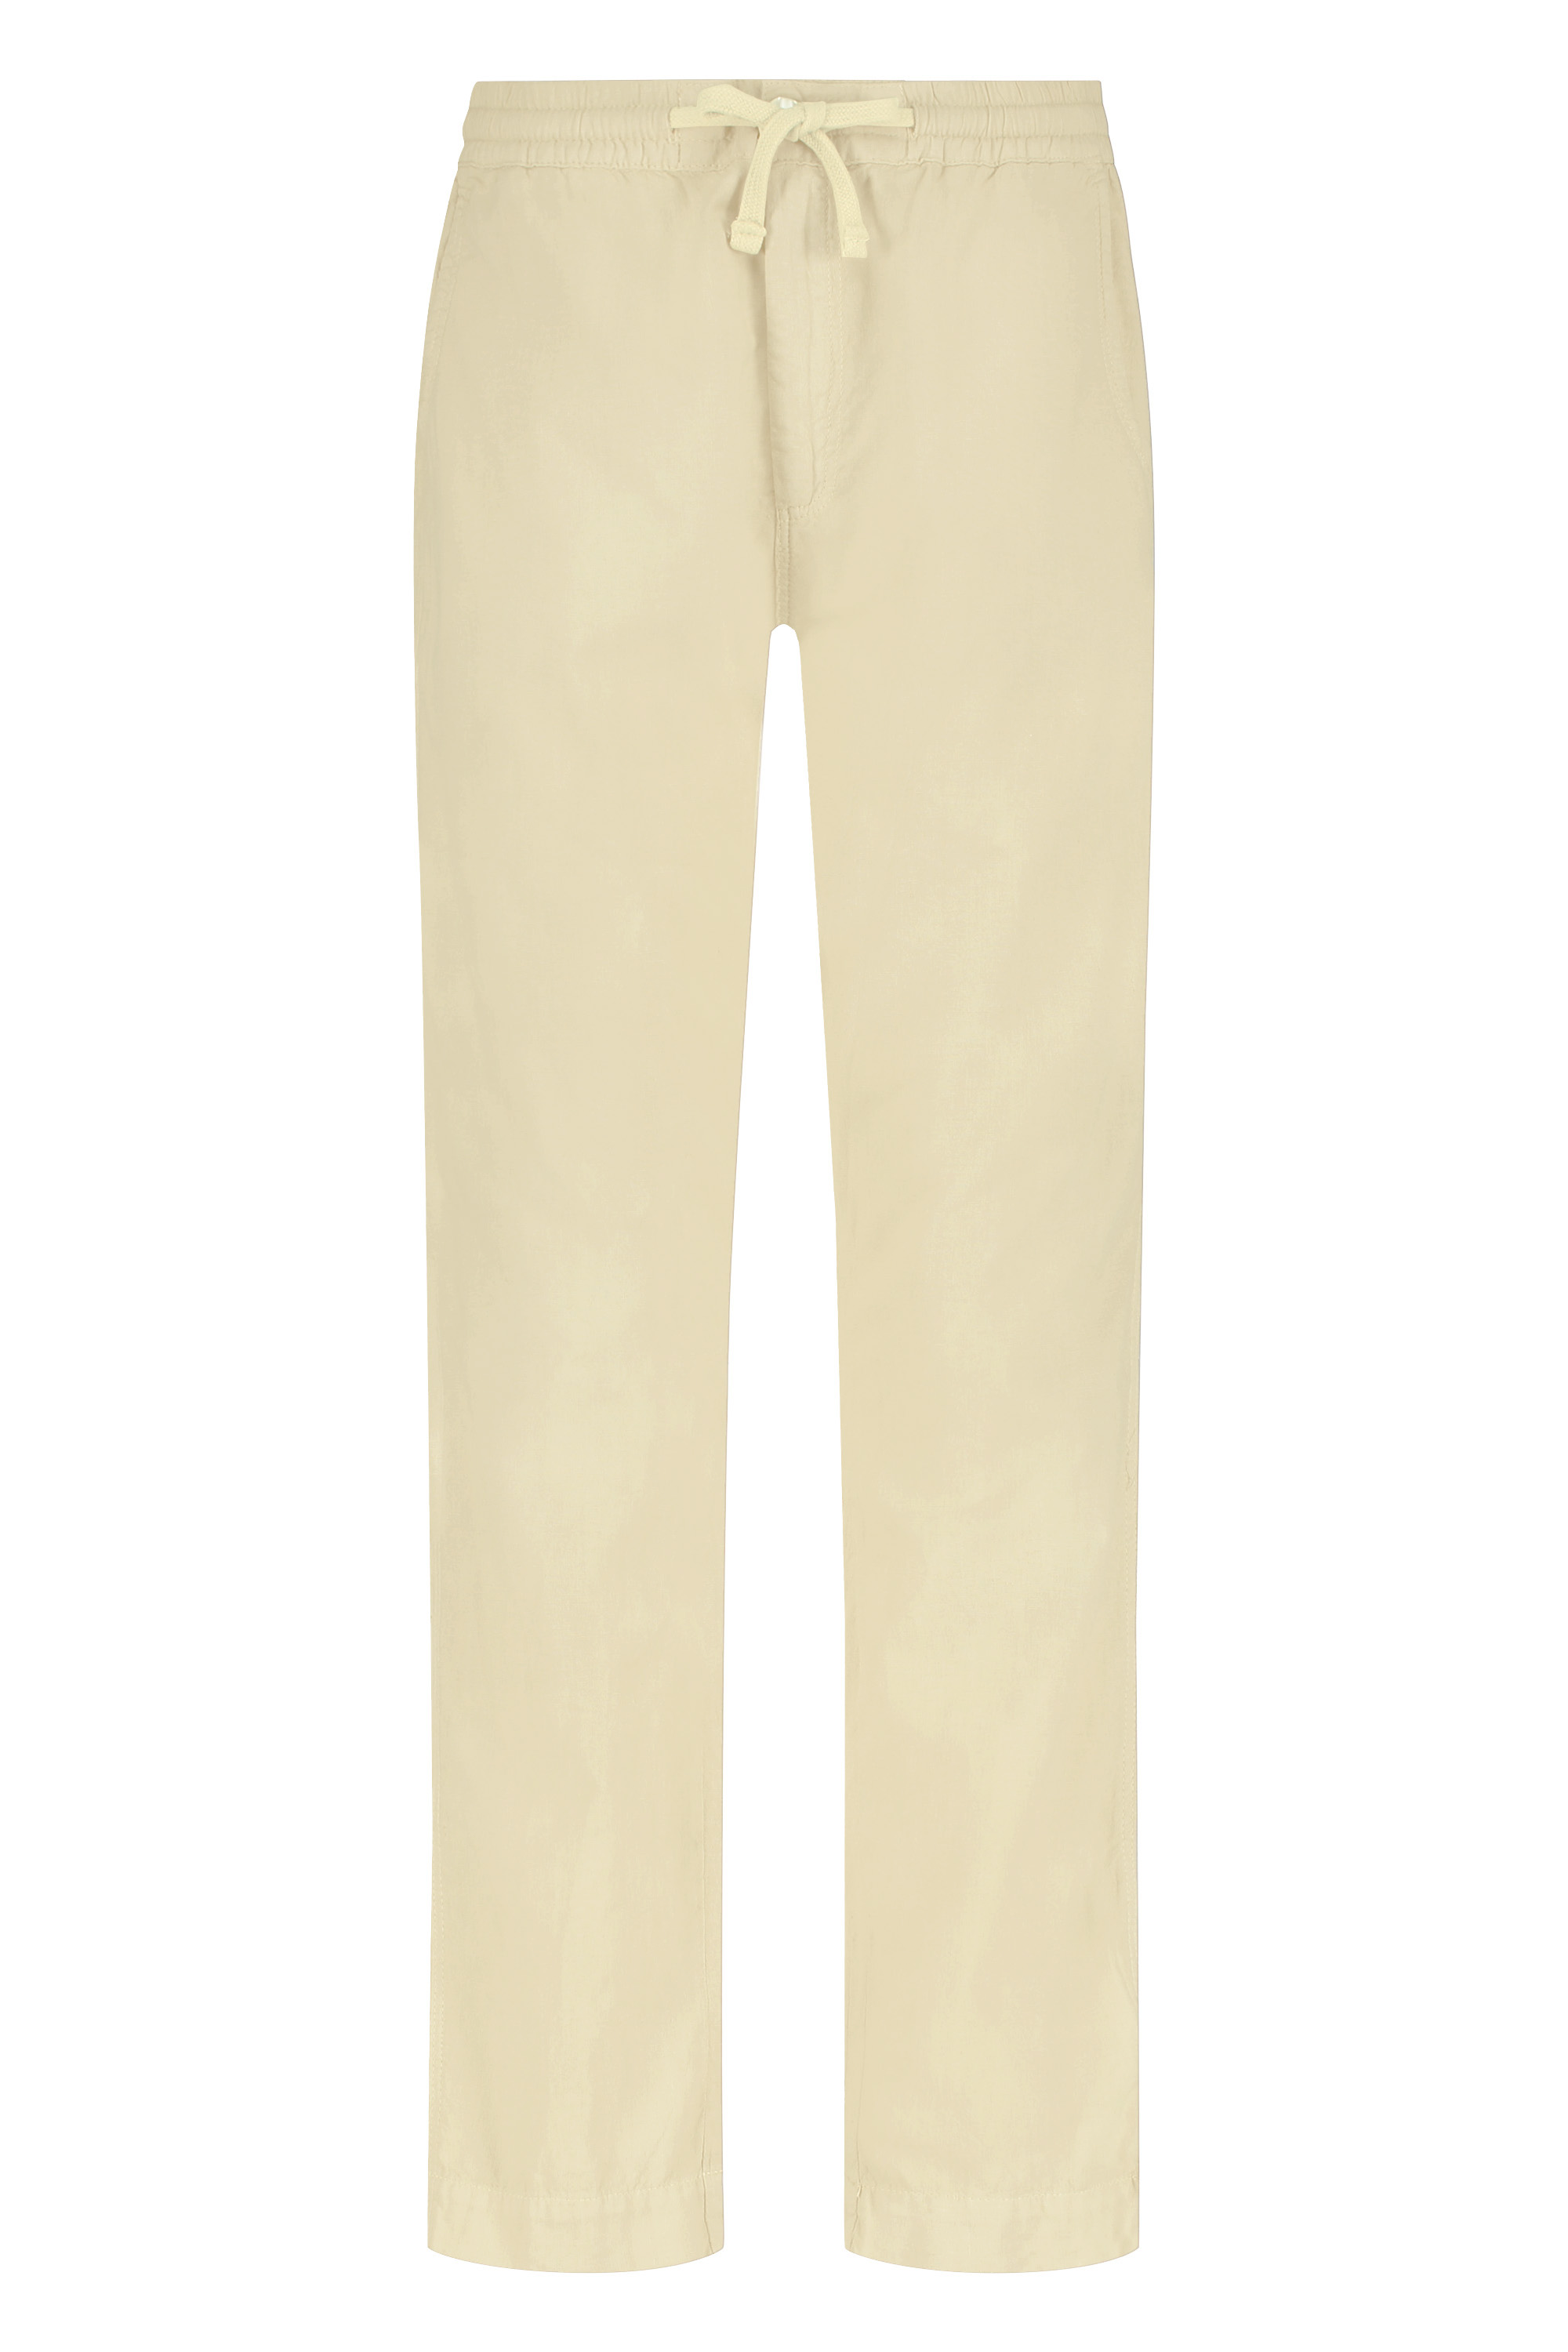 Relaxed Fit Linen Pants Sant Carles – Cream